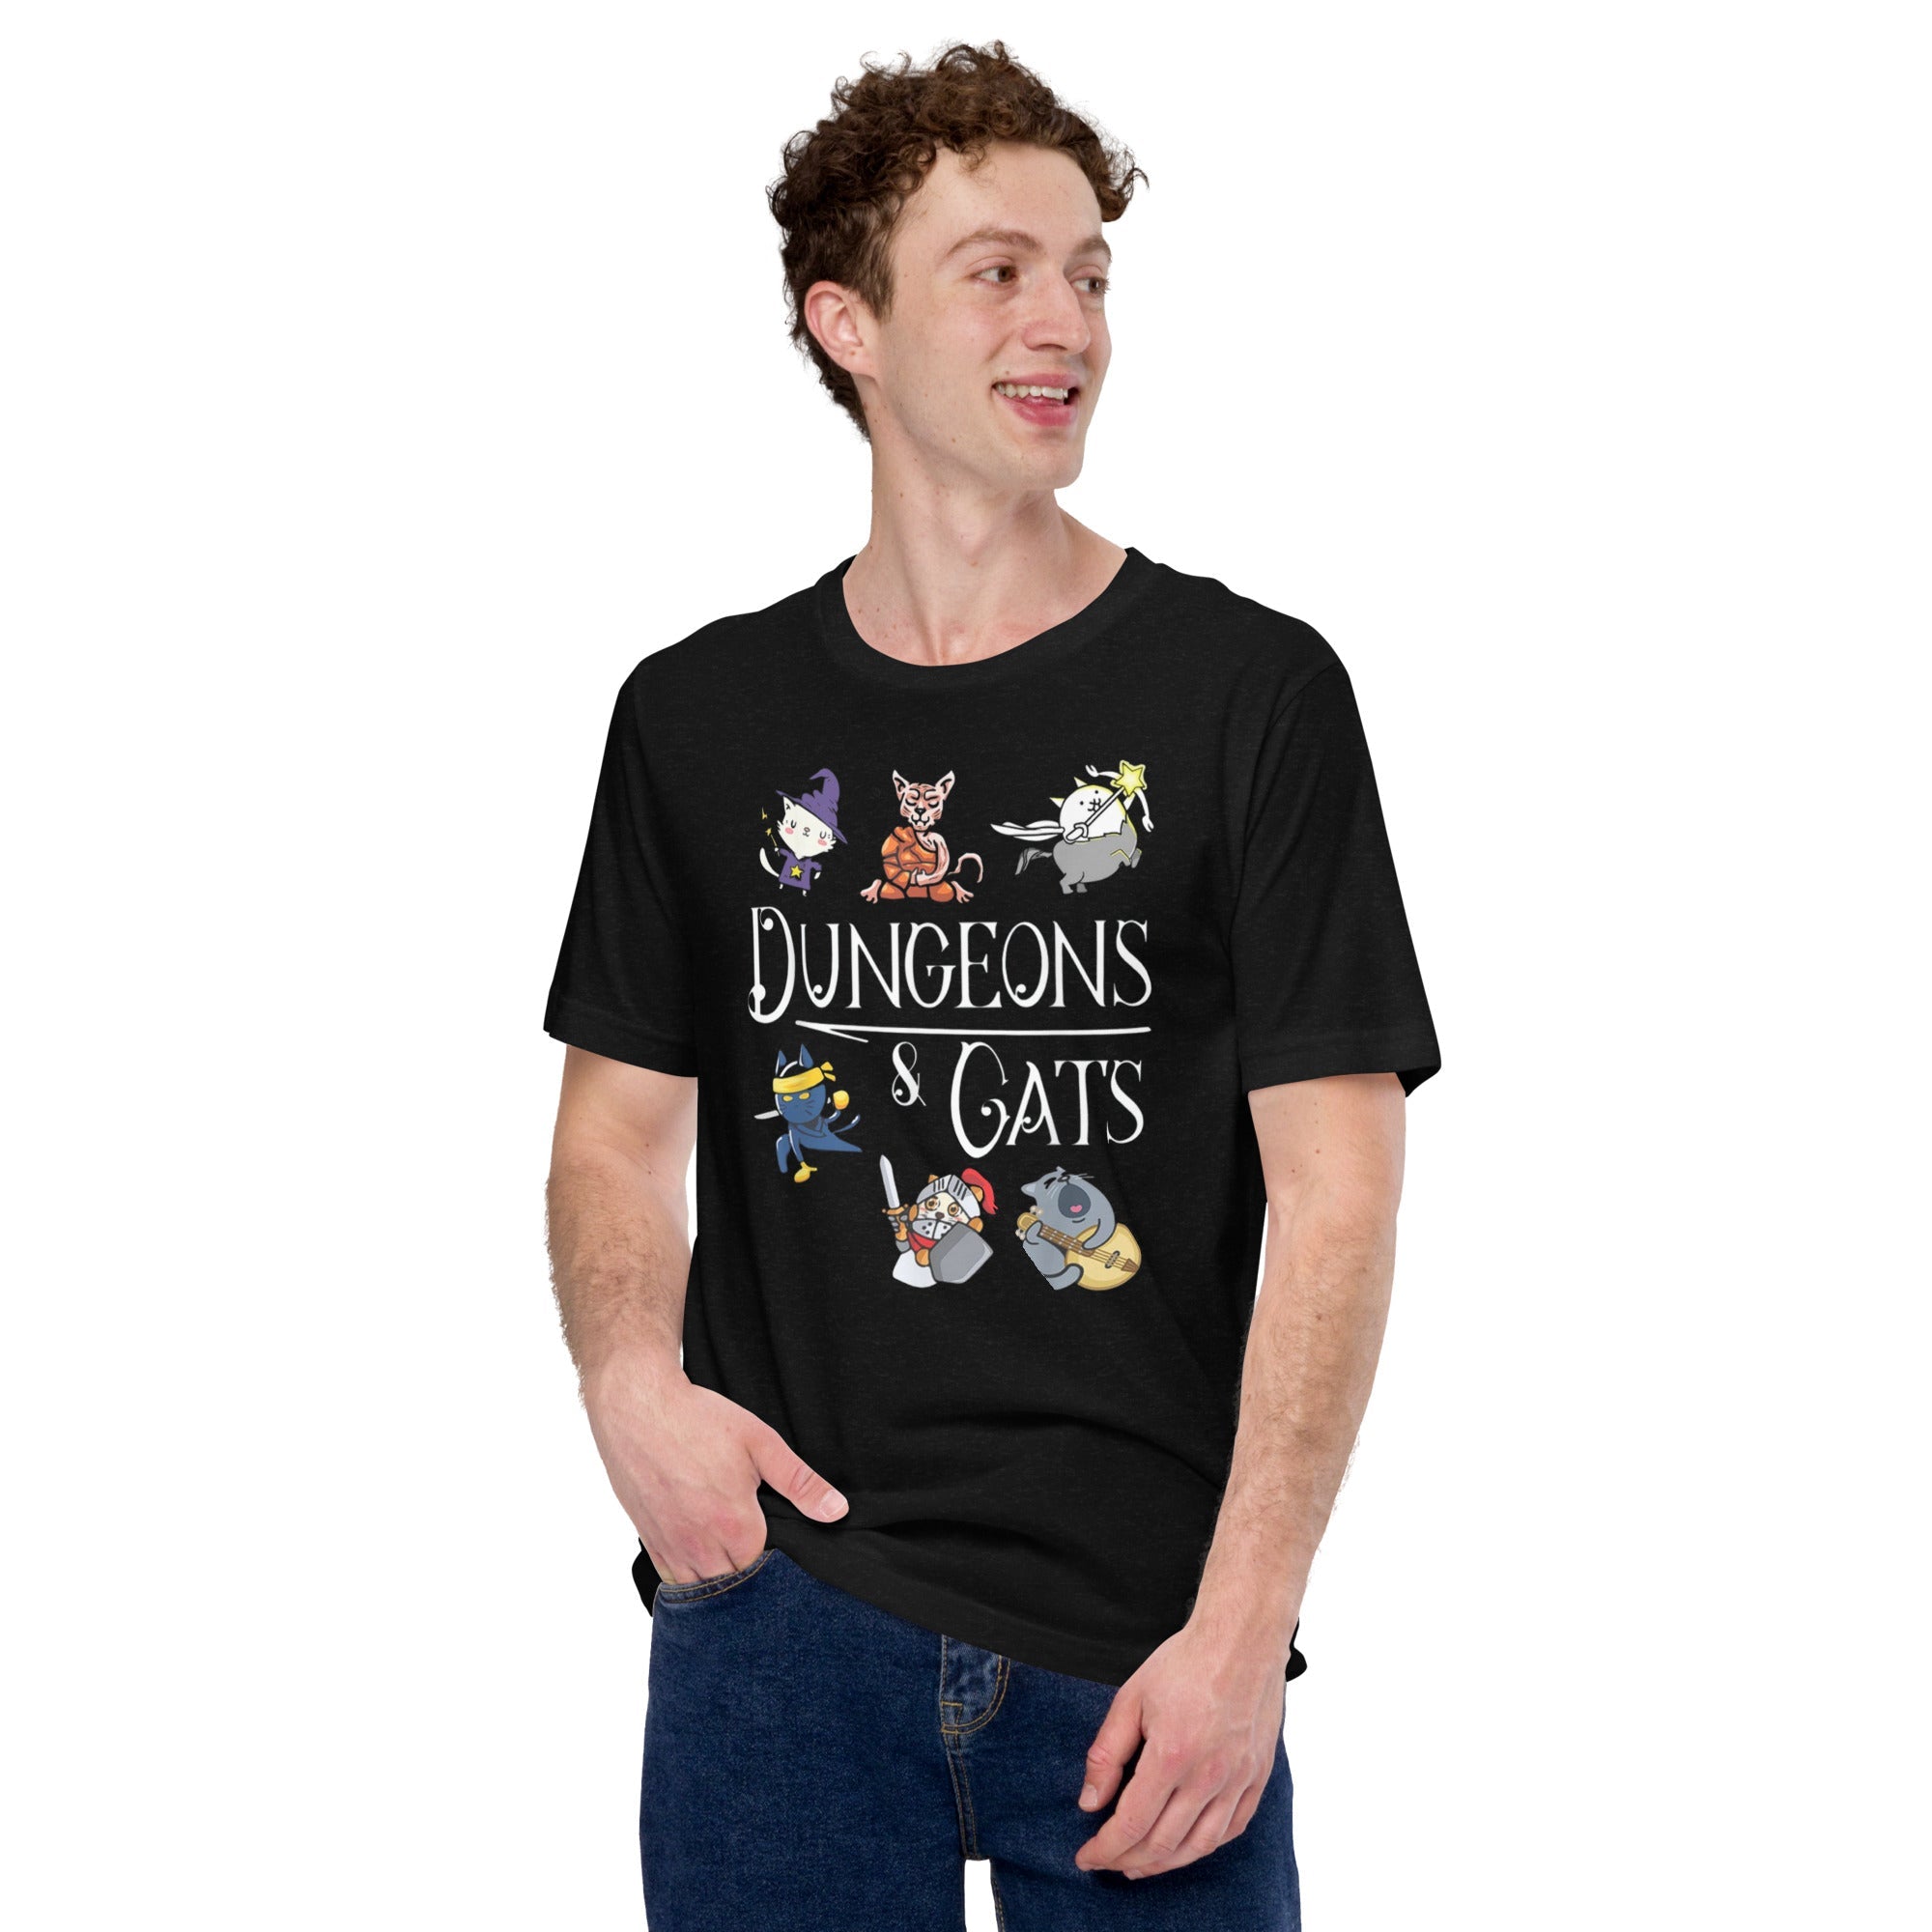 Dungeons and Cats shirt